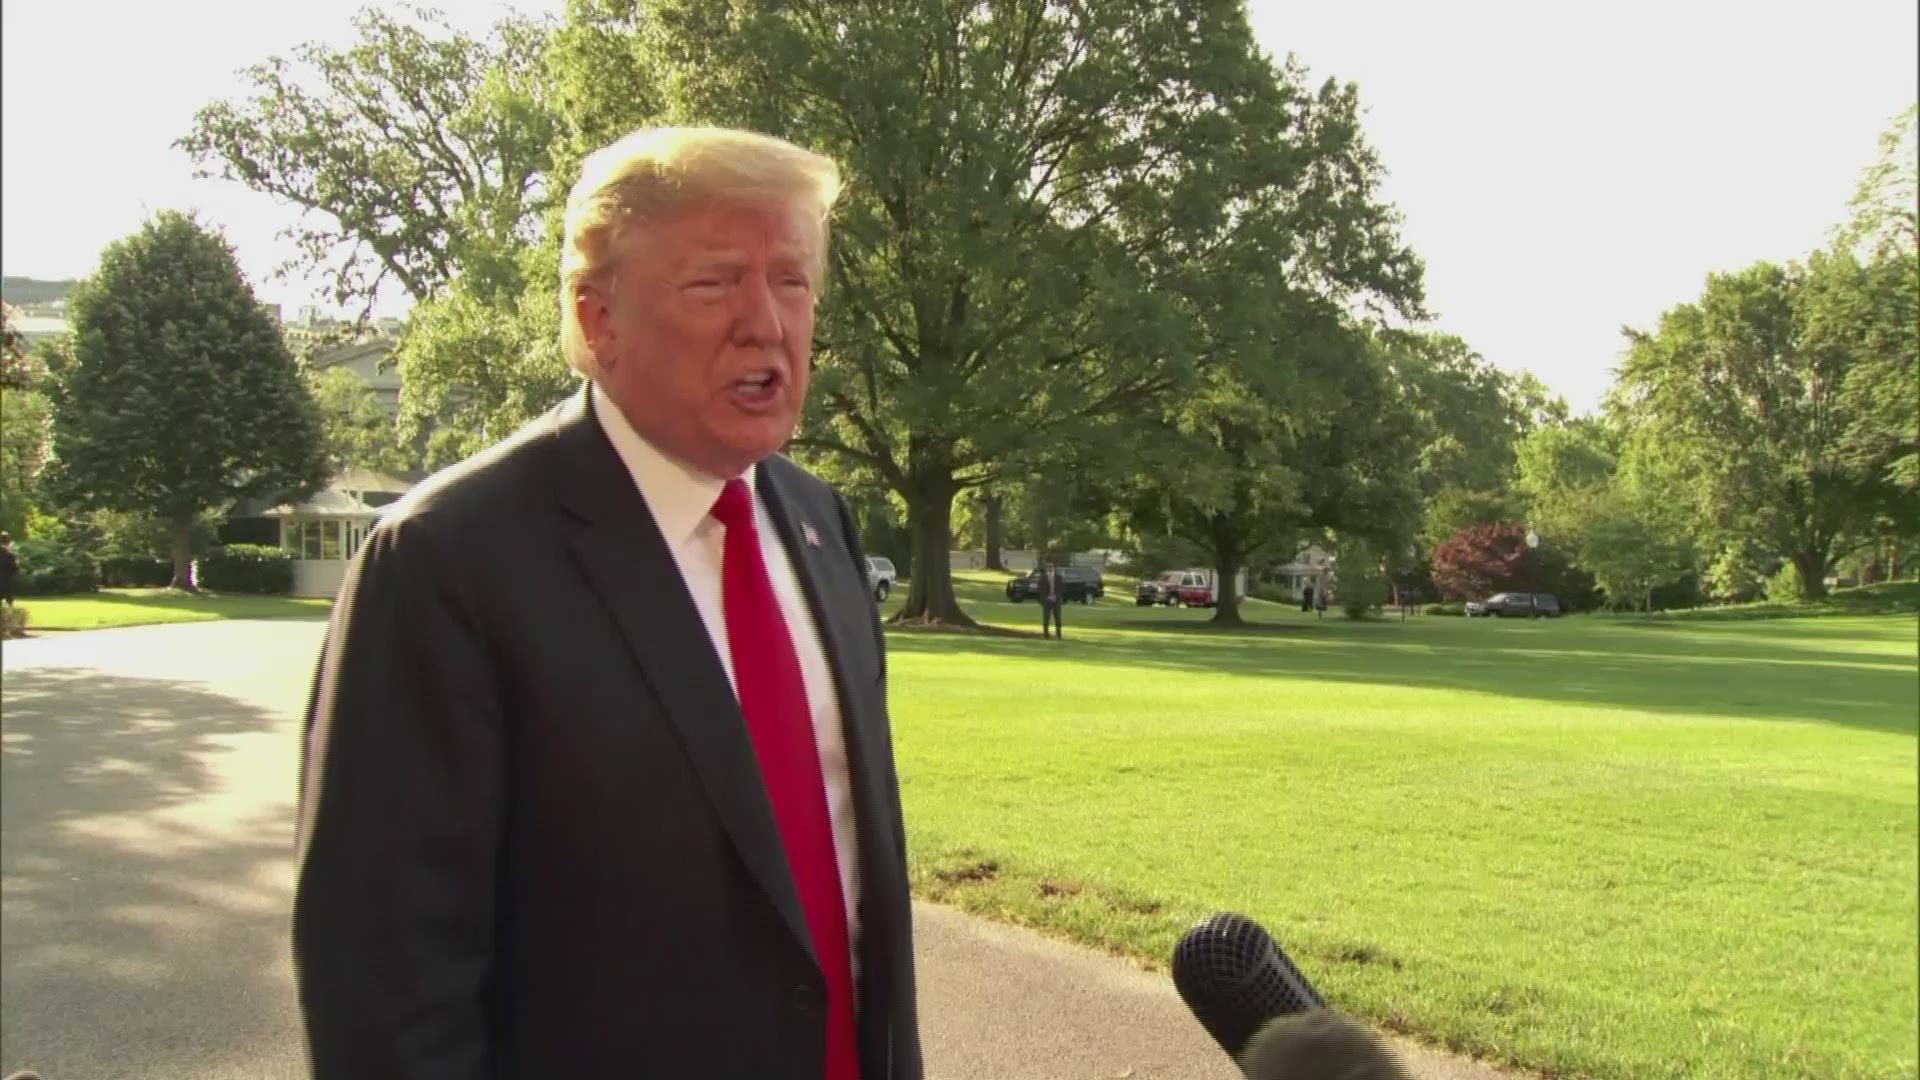 President Donald Trump spoke to media members after special counsel Robert Mueller issued his first public comments since his appointment nearly two years ago. https://on.wtsp.com/2Z2zidb